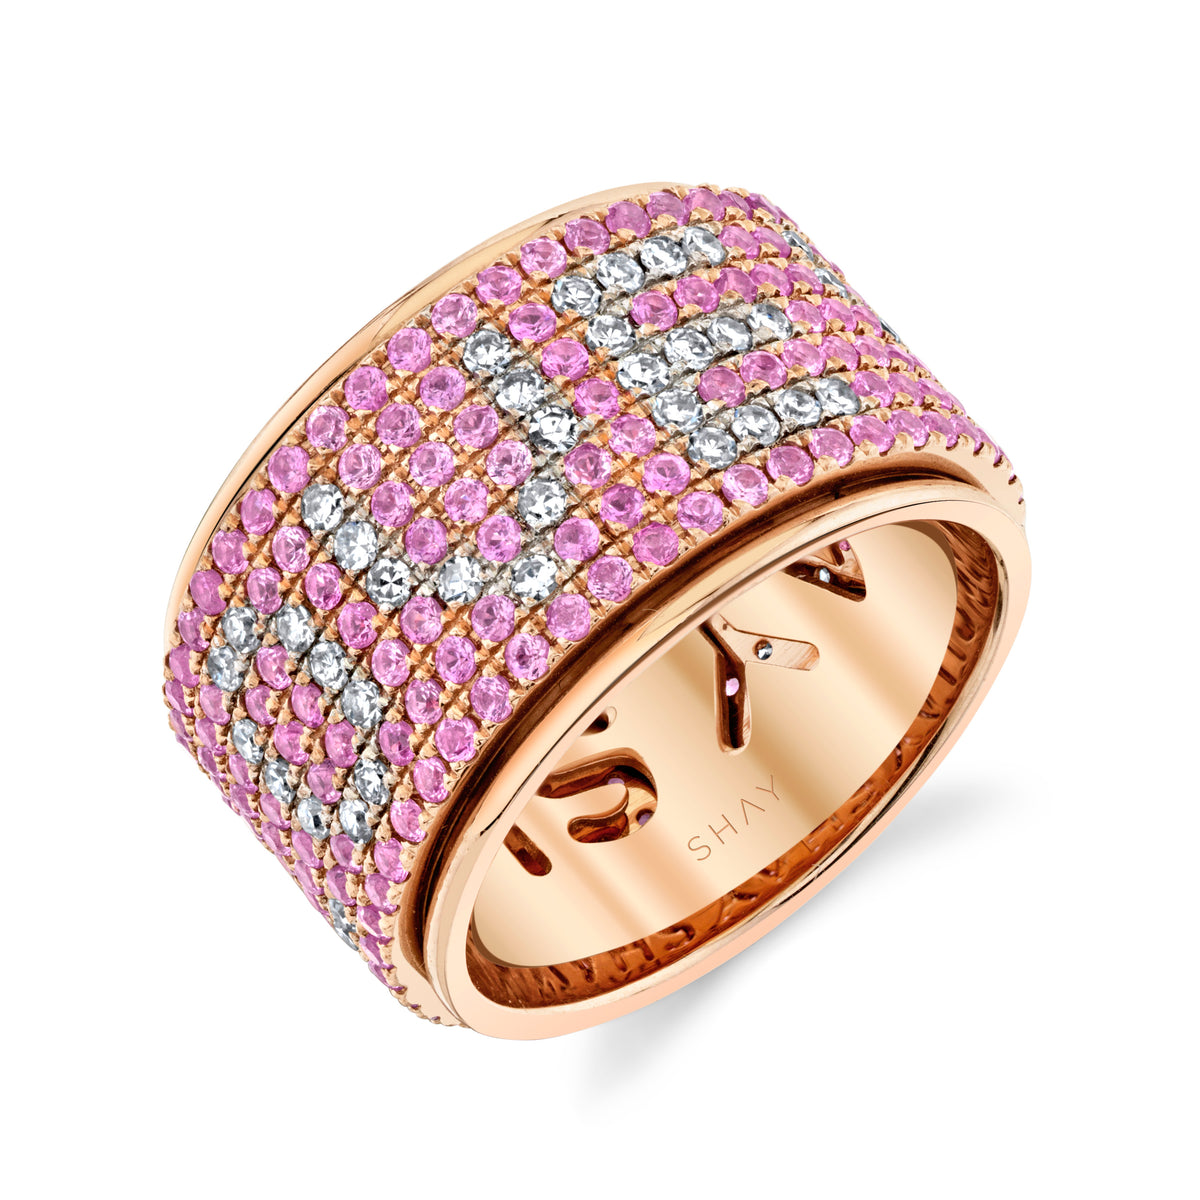 DIAMOND & PINK SAPPHIRE "I LOVE YOU" SPINNER RING